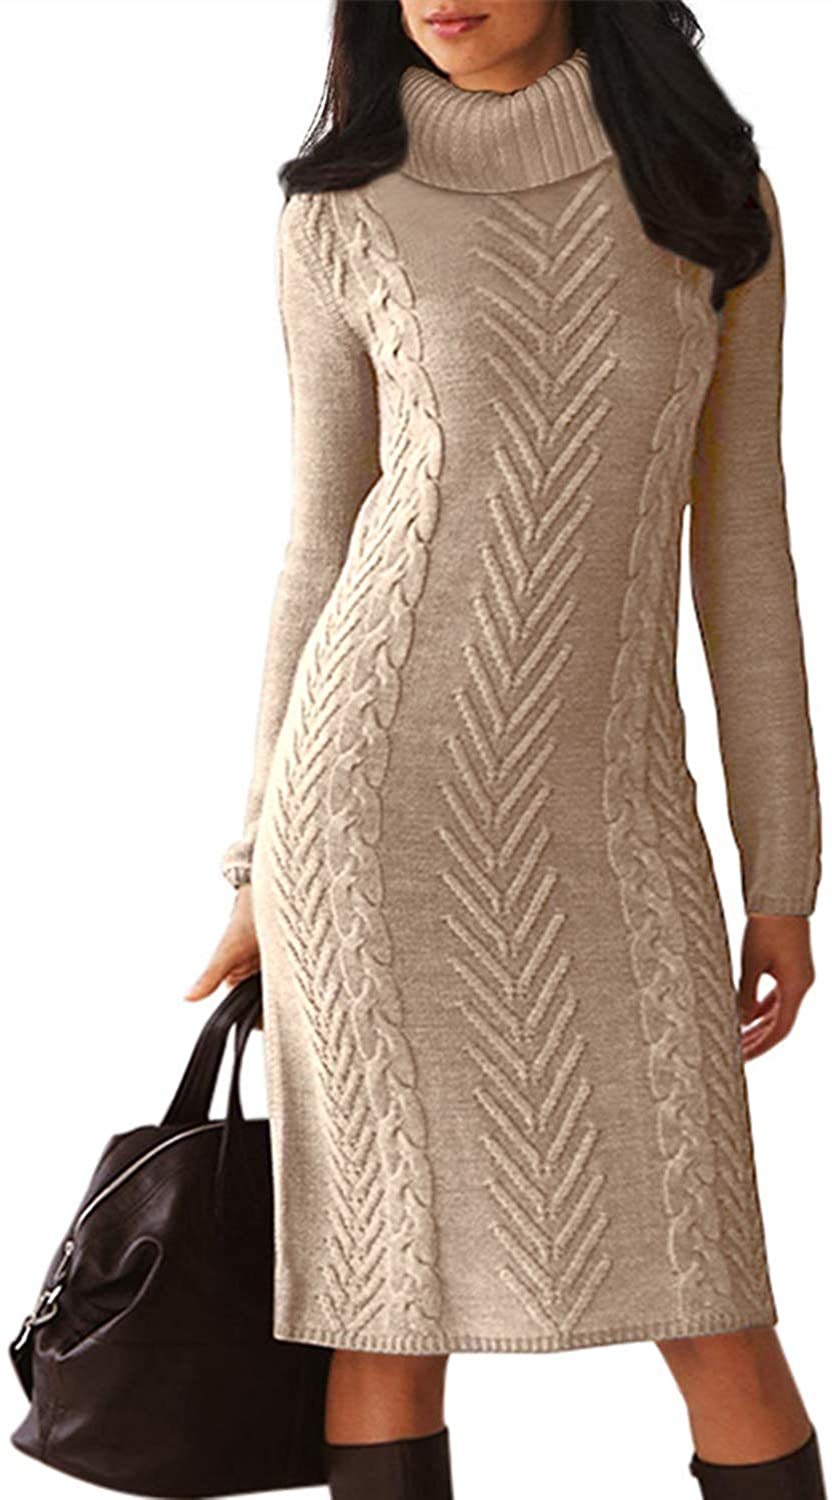 Turtleneck Long Sleeve Chunky Cable Knit Sweater Dress